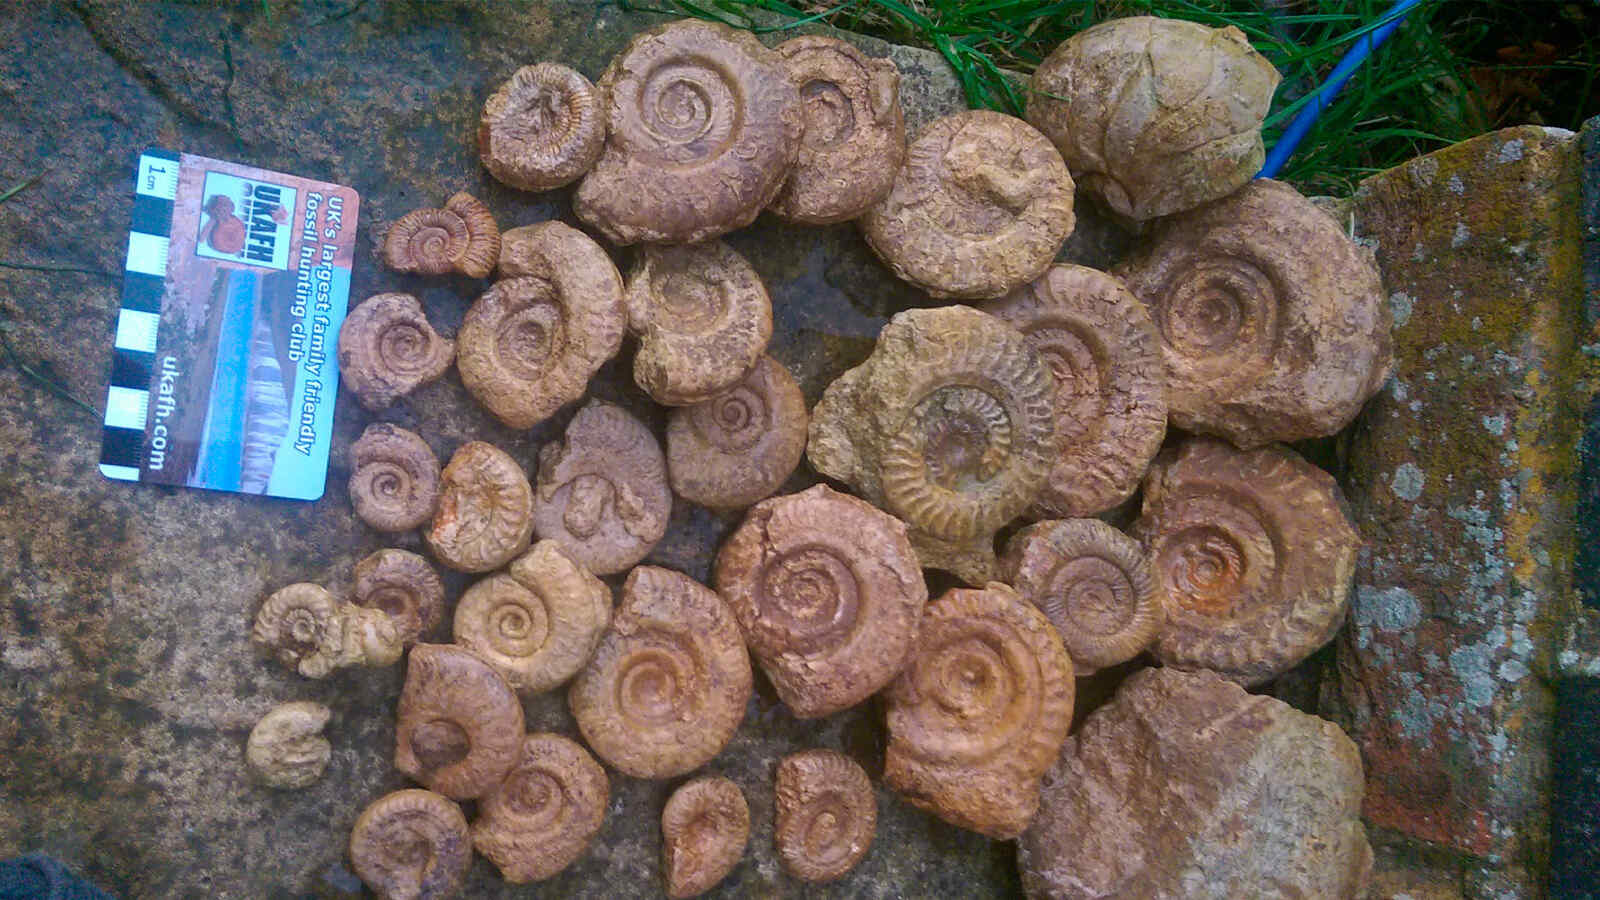 The fossils collected during the hunt